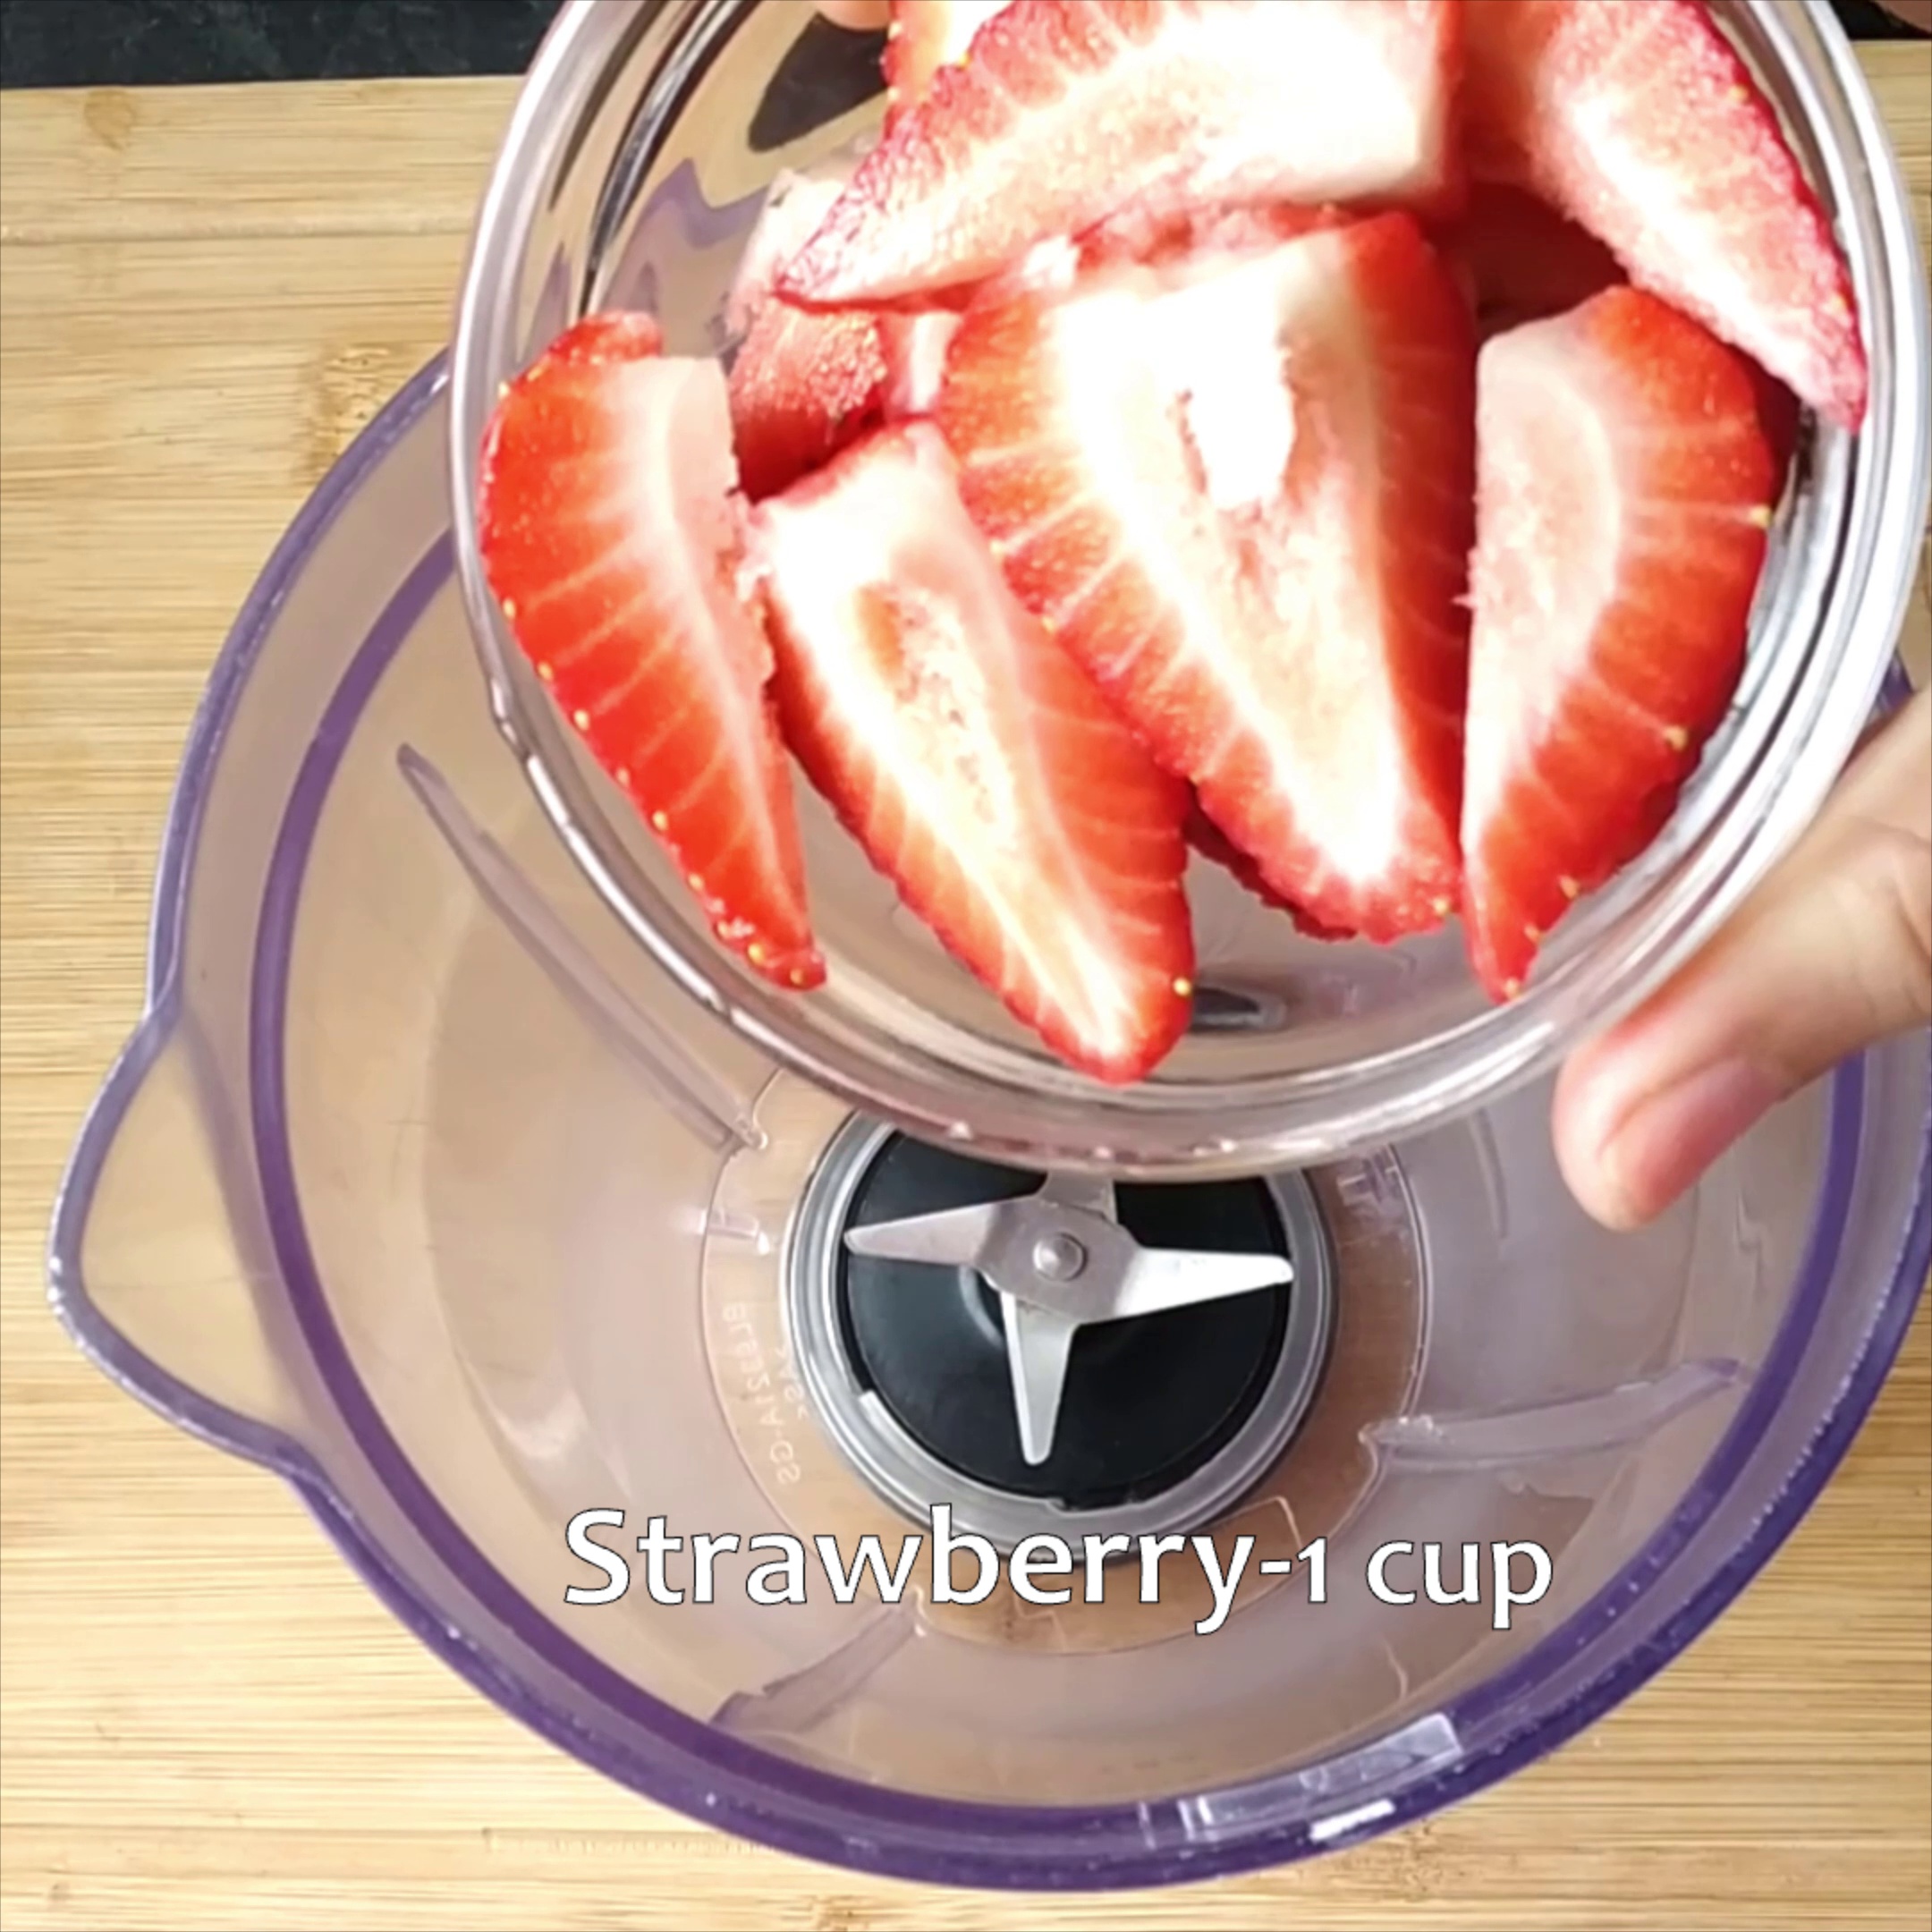 Step 1 - Wash and pat dry the strawberries. Remove the top and cut the strawberries into halves. Place them in a blender jar.